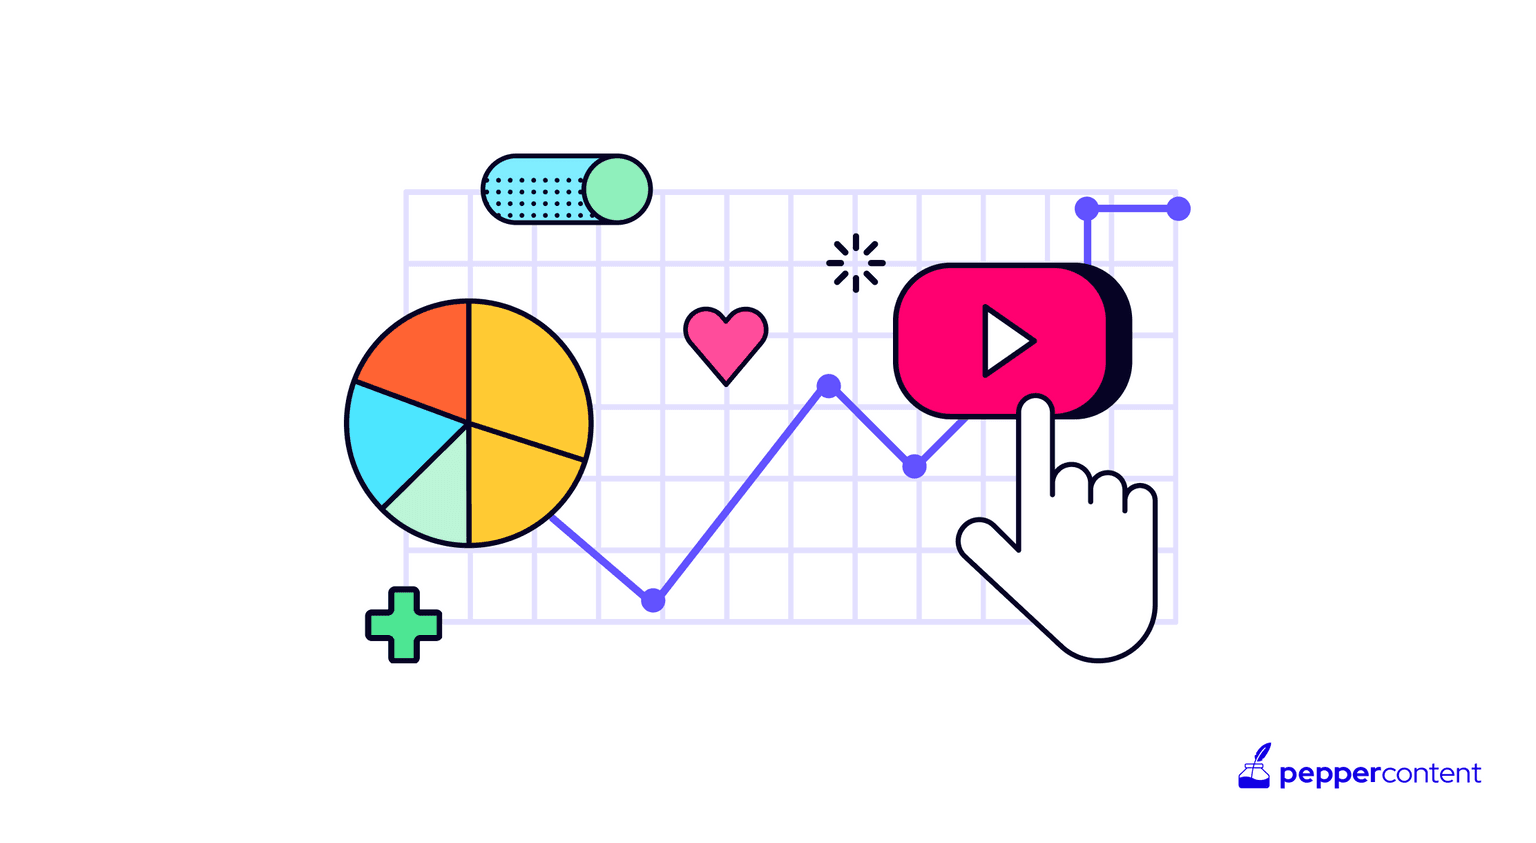 Video Analytics: Measuring And Analyzing Performance Metrics For Video Campaigns